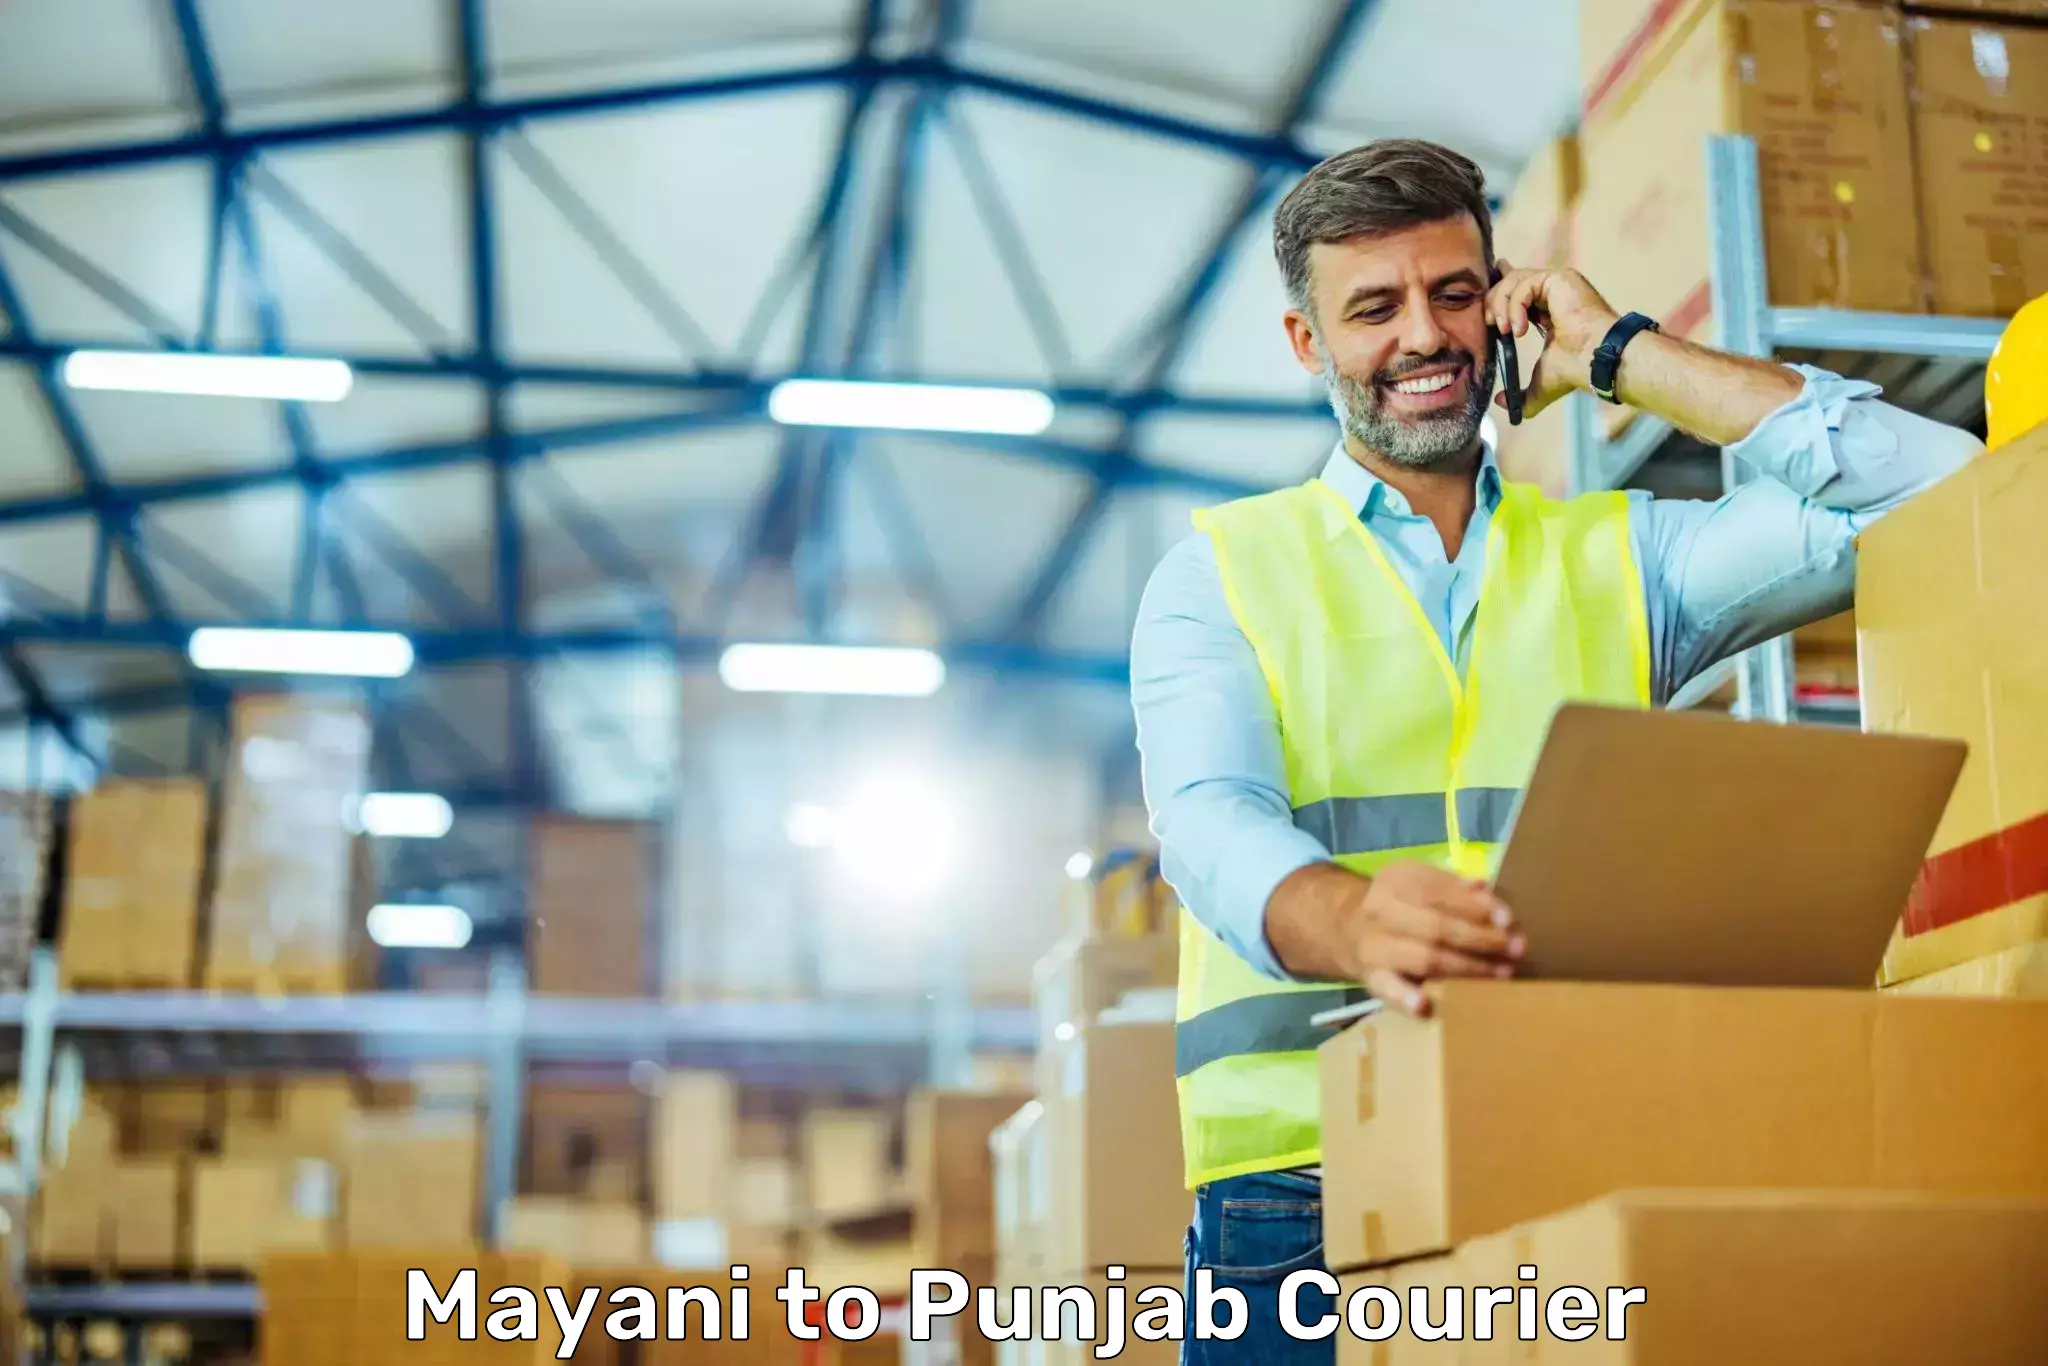 Efficient parcel service in Mayani to Punjab